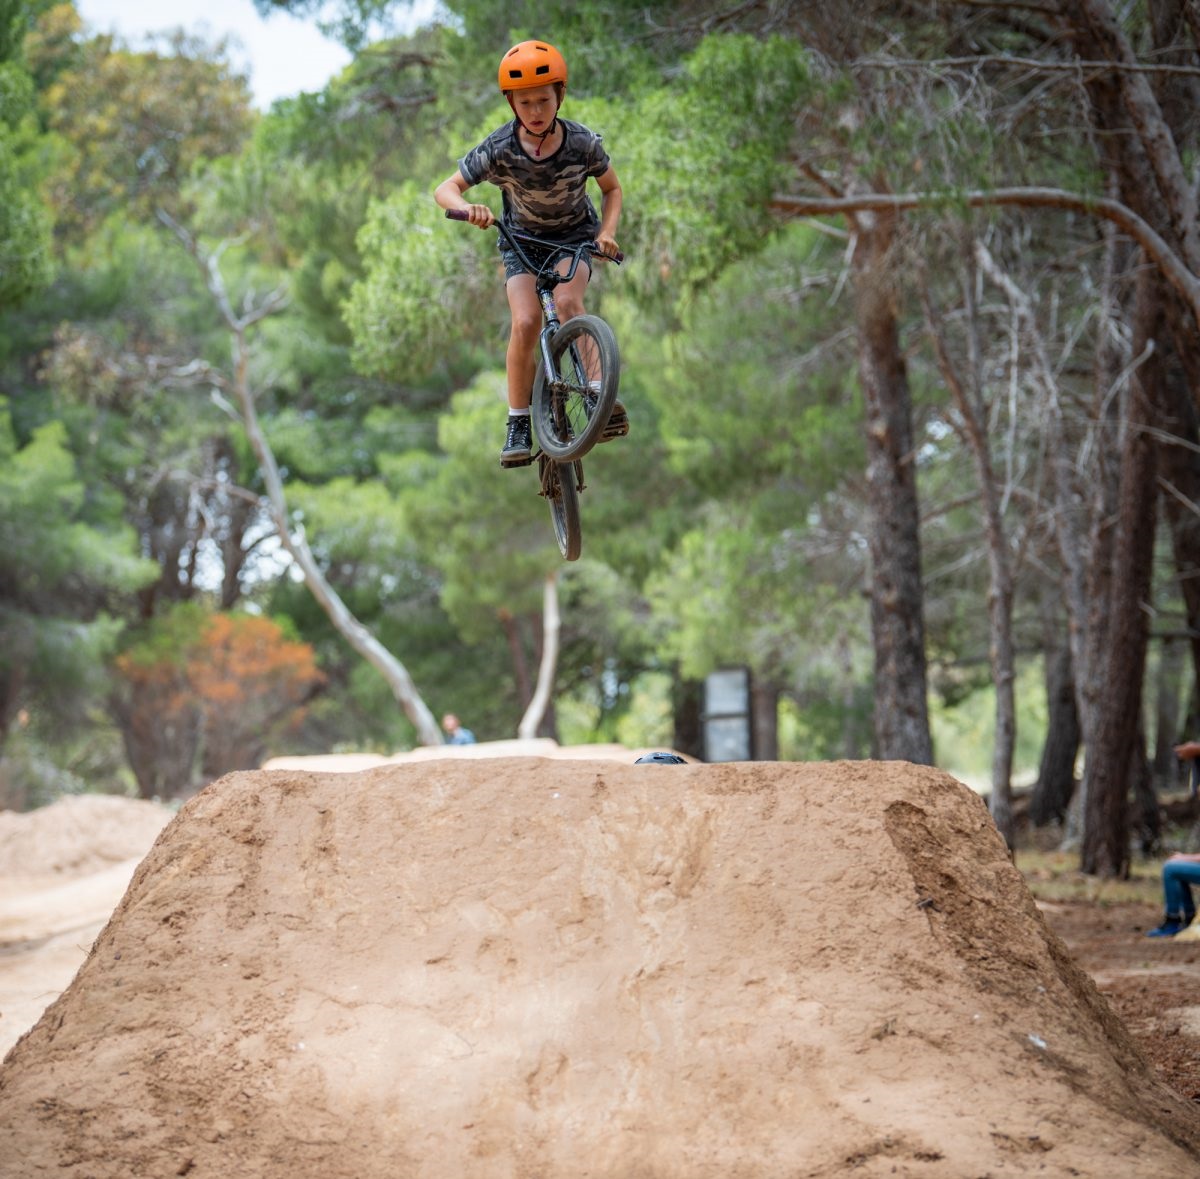 Young BMX and mountain biking enthusiasts have been getting their hands dirty with a project combining the City of Onkaparinga and the community.